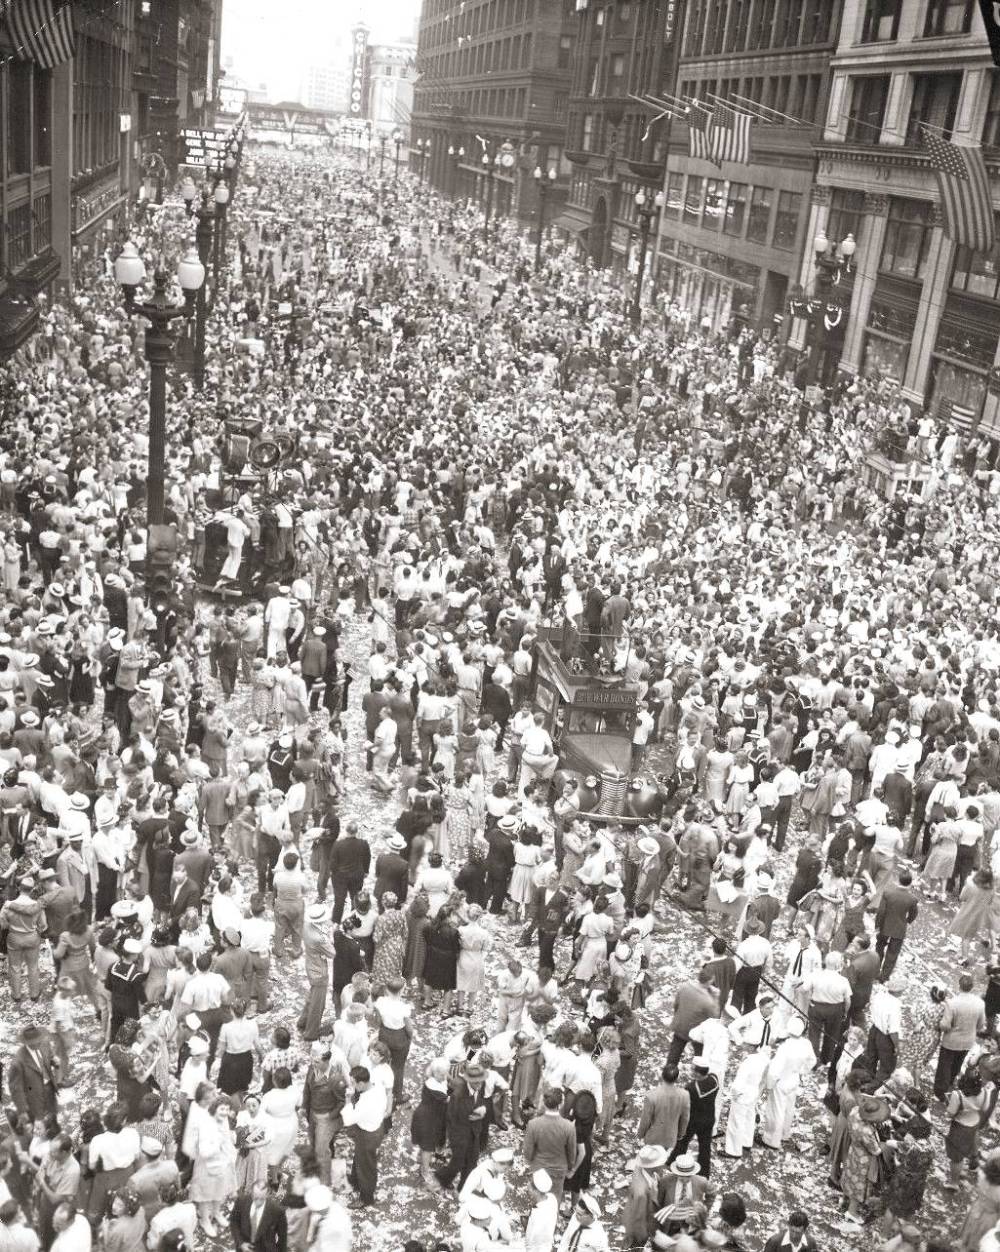 PHOTO - CHICAGO - STATE STREET - AERIAL - LOOKING N - VJ DAY CROWD - 1945